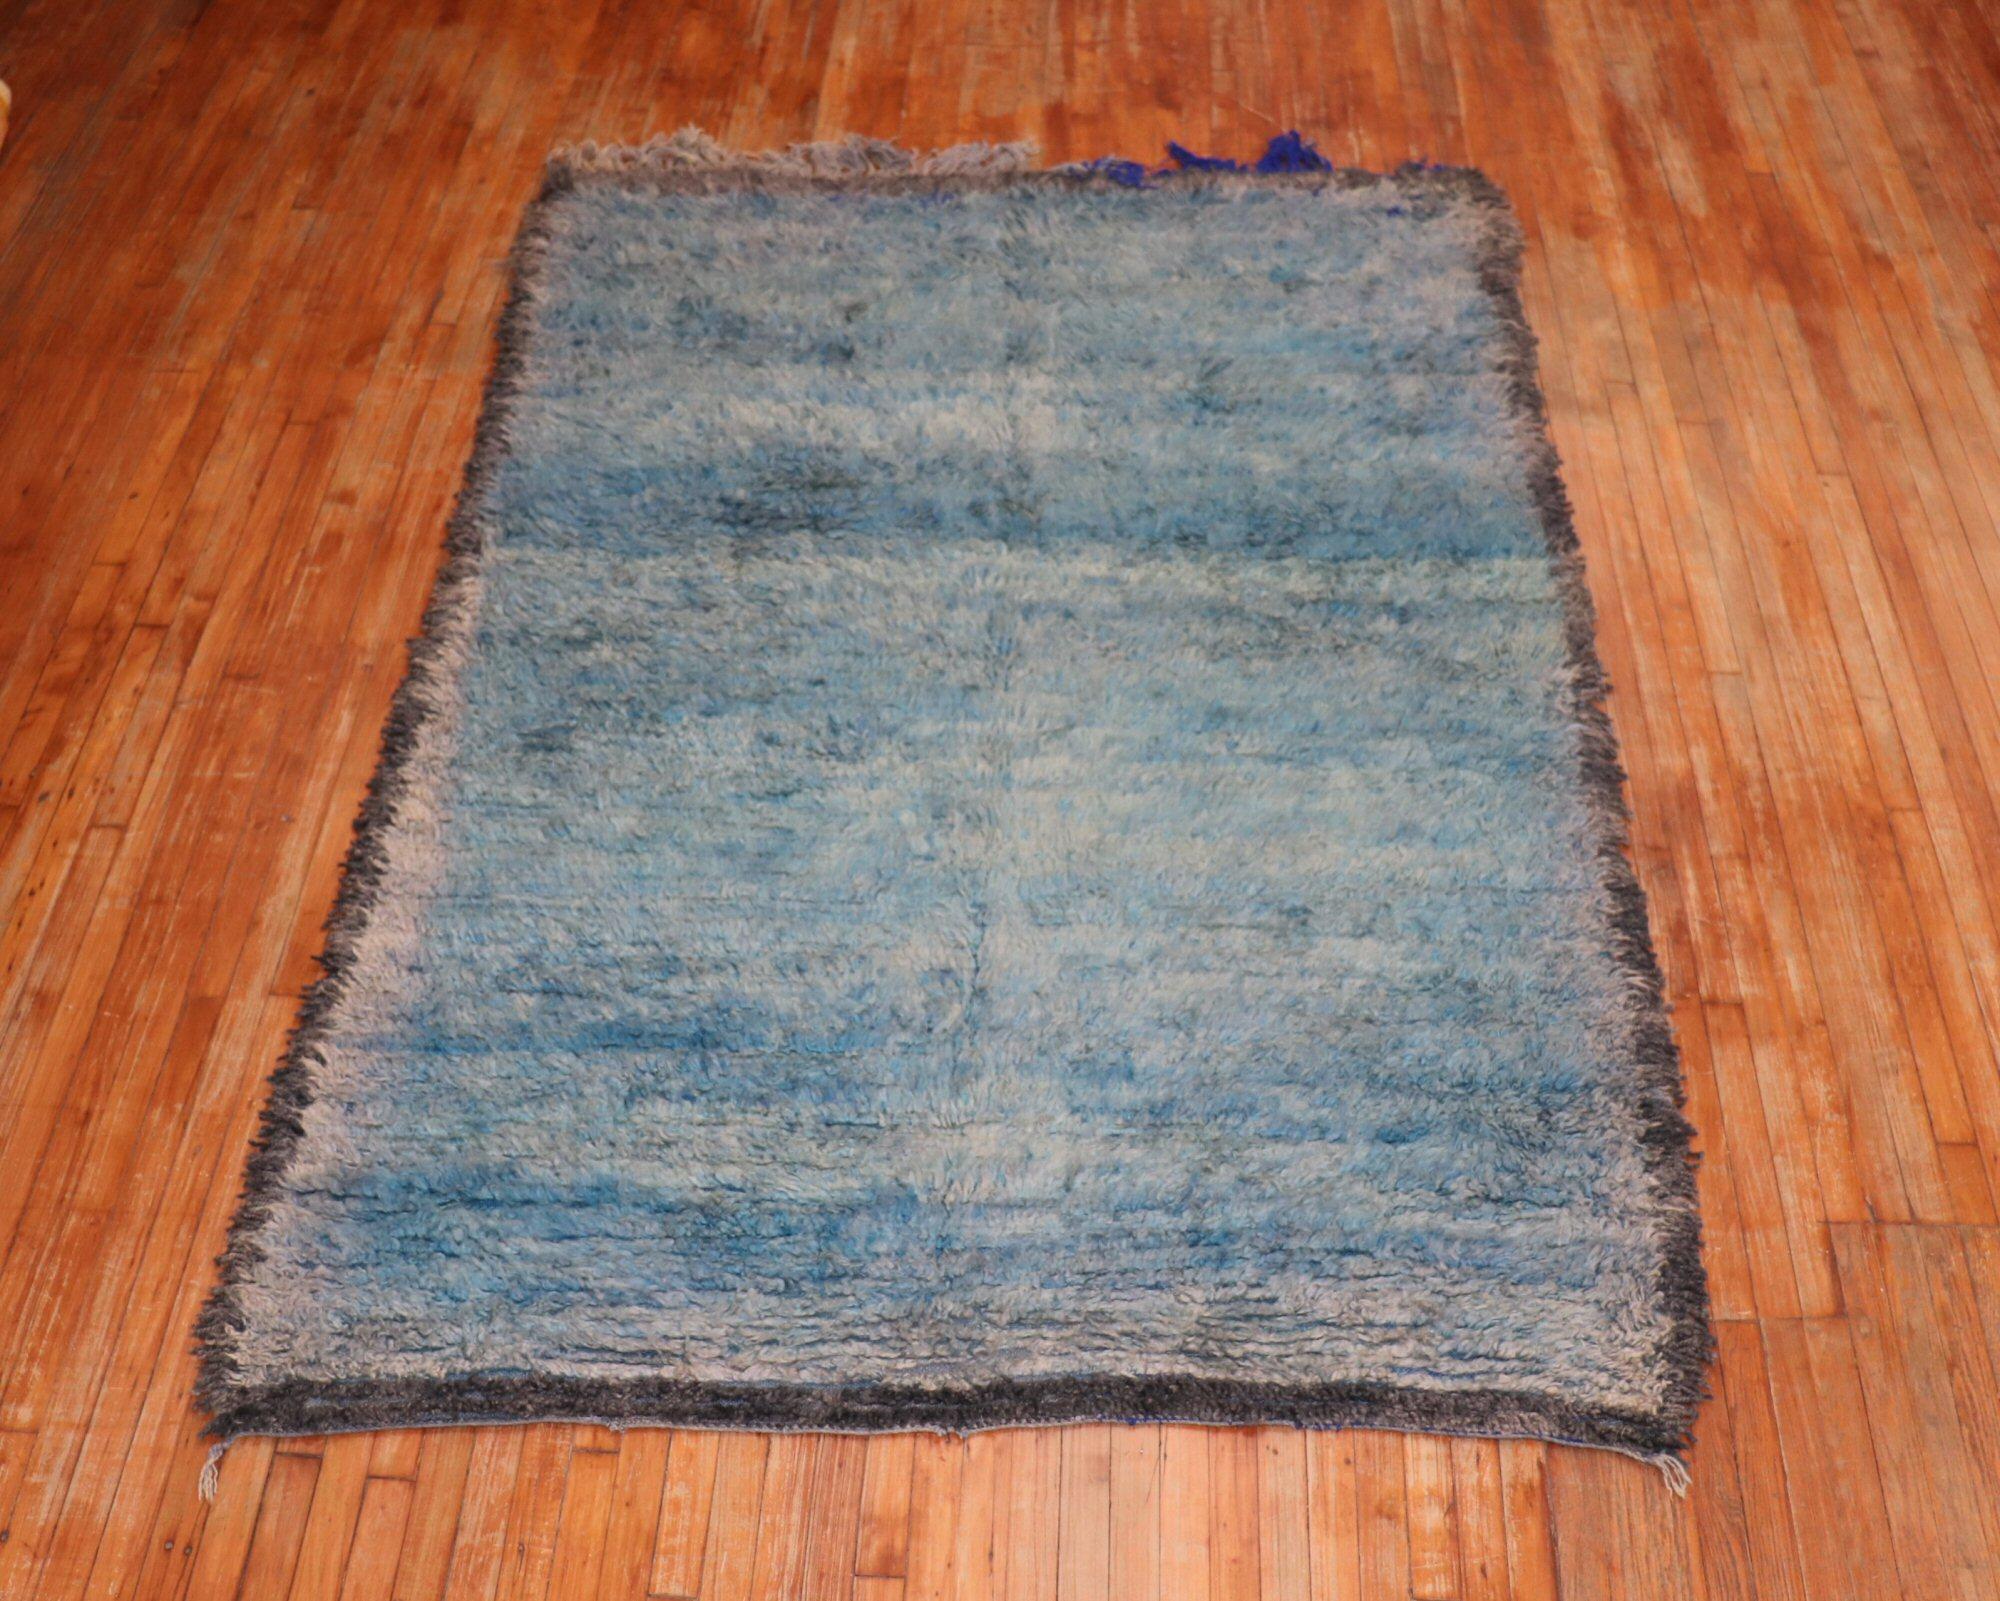 An authentic 20th century Moroccan rug with a Minimalist pattern in teal blue and striations of gray and brown surrounded by a sold gray border. Boho chic at its finest!


Size: 6' x 9'.